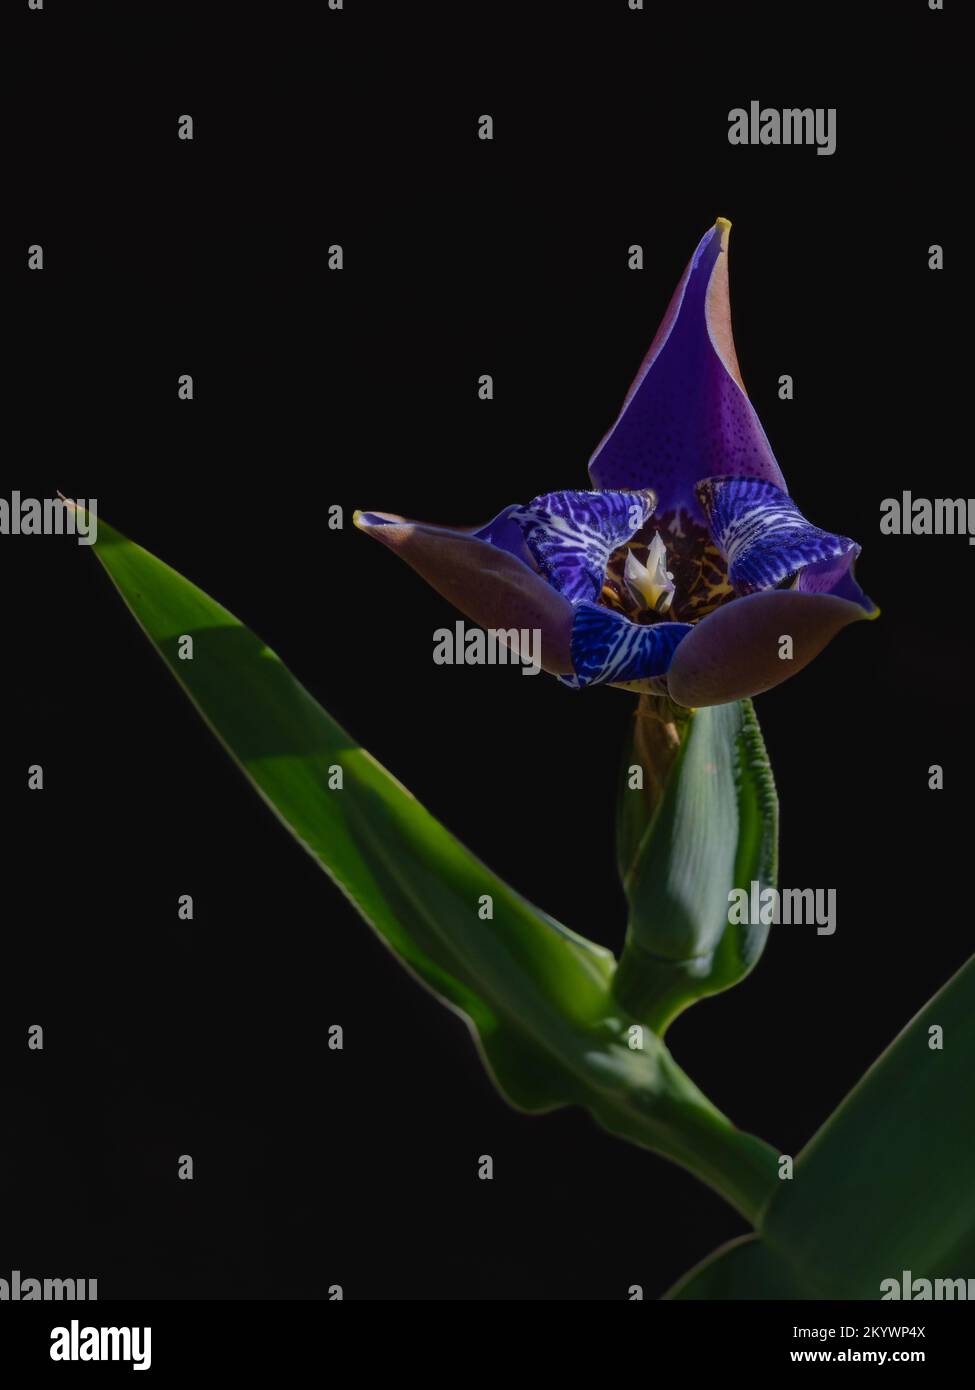 Closeup view of isolated bright blue walking iris neomarica caerulea flower opening outdoors in natural sunlight on black background Stock Photo